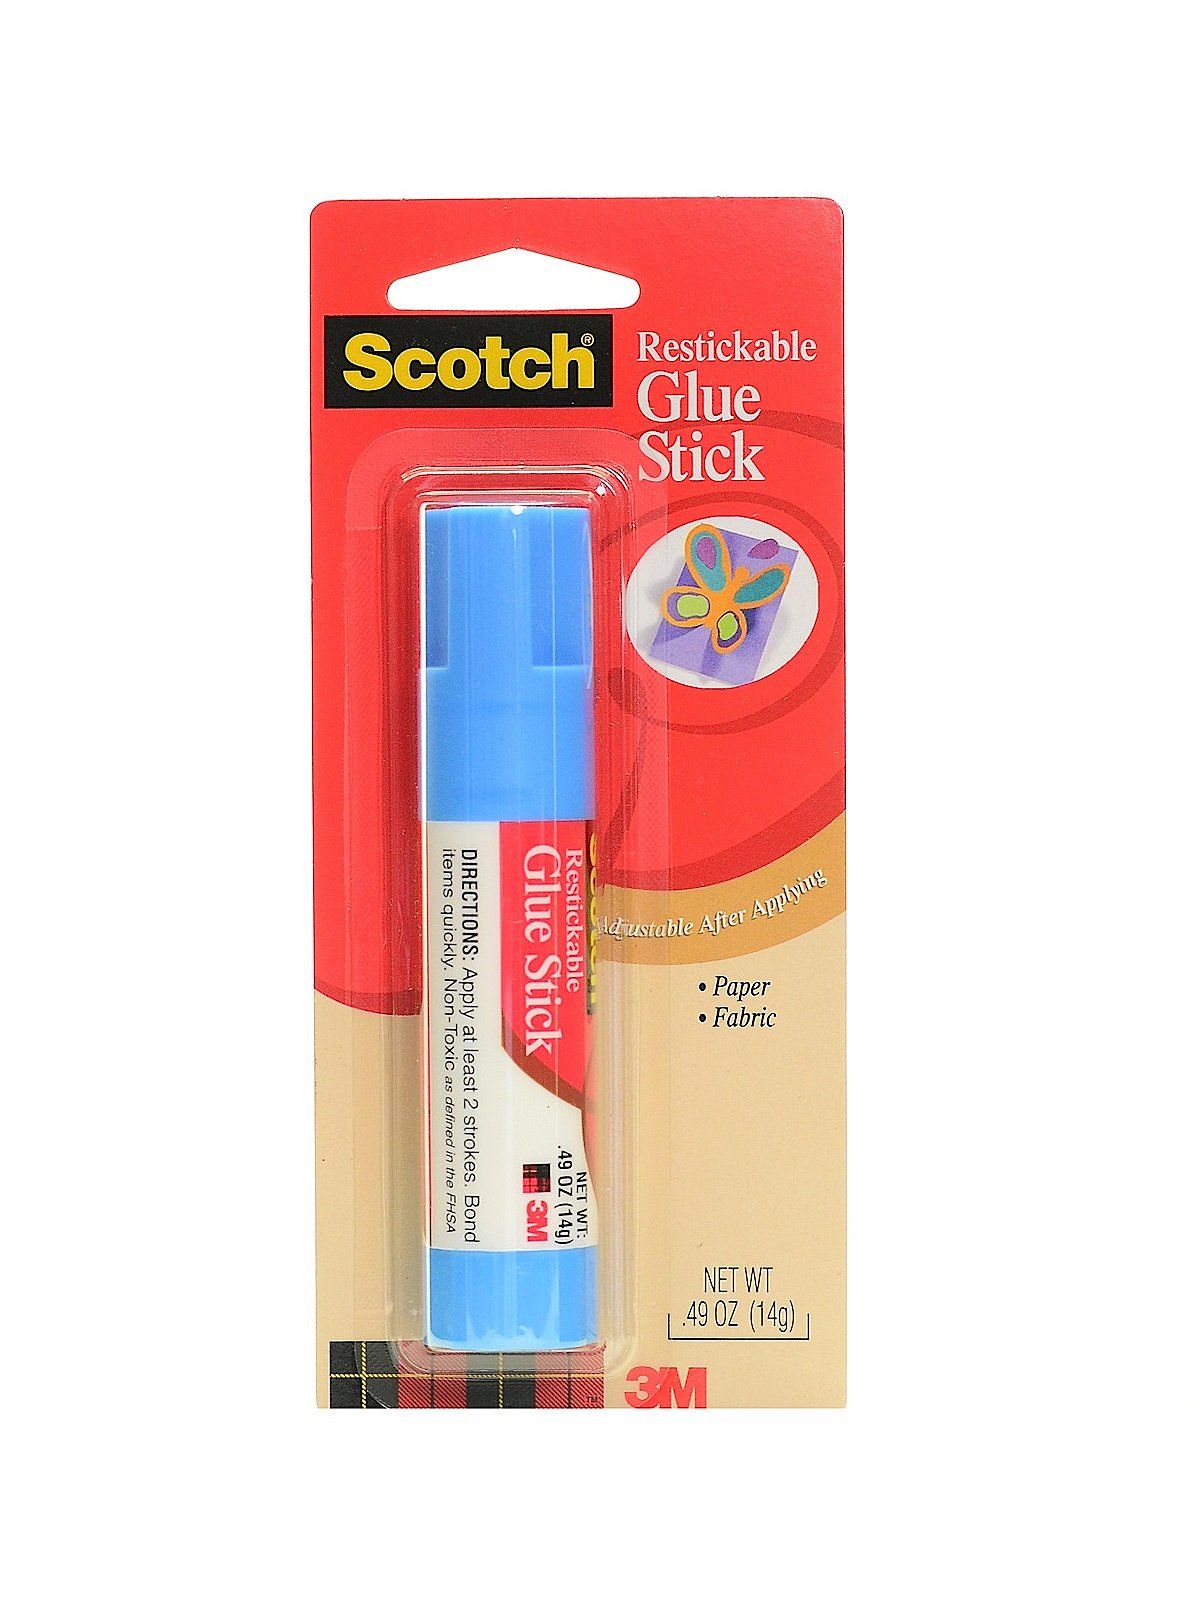 Scotch Repositionable Glue Stick, 0.49 oz, Acid Free and Non-Toxic  (6314-CFT)